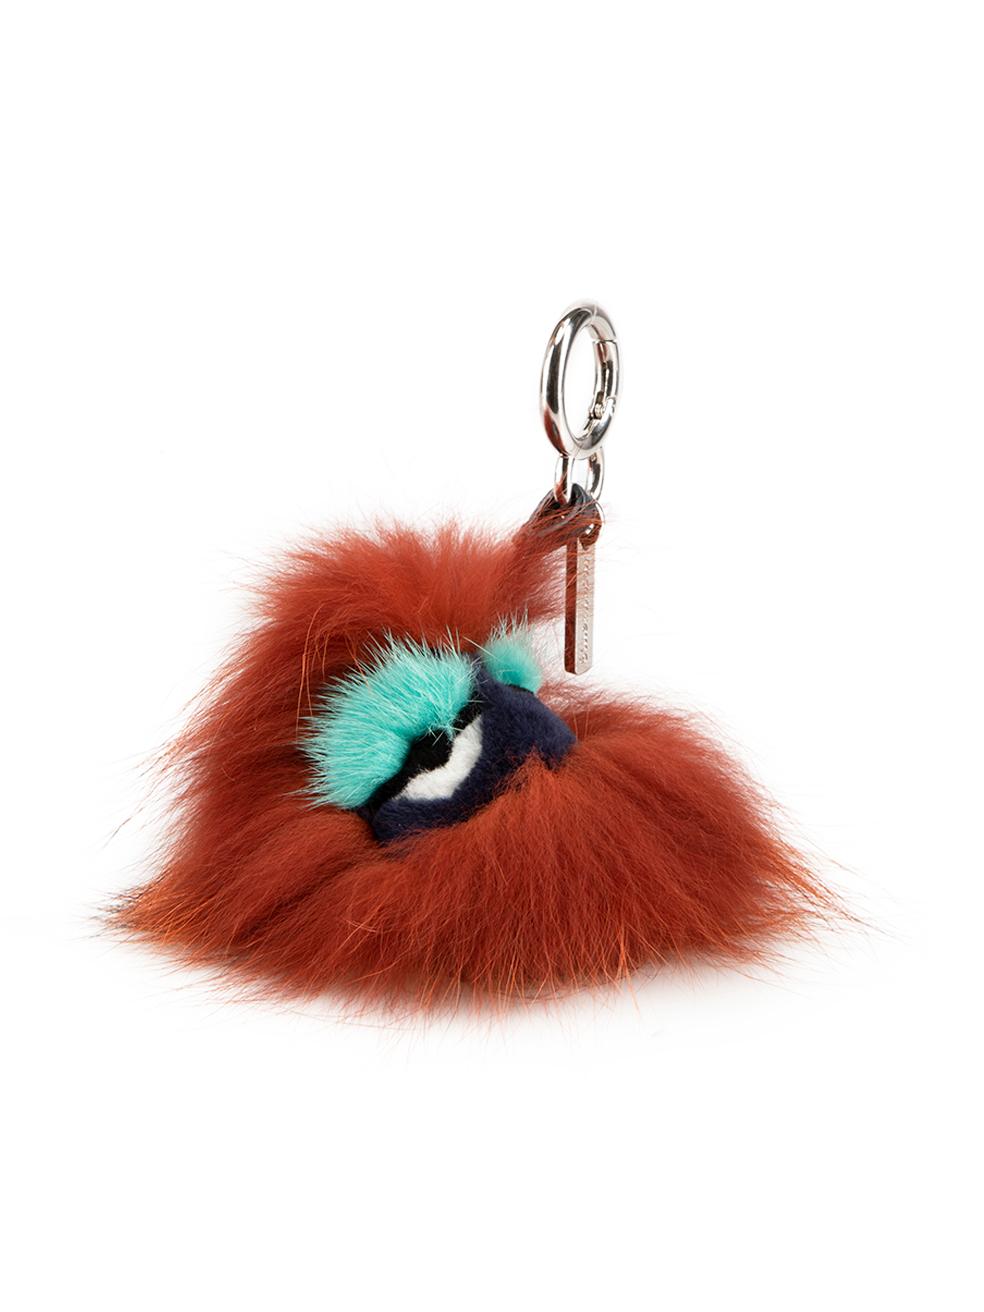 CONDITION is Very good. Hardly any visible wear to keyring is evident on this used Fendi designer resale item. This item comes with original dust bag.



Details


Blueminous

Brown

Fur

Keyring

Face design

Push clasp



 

Composition

EXTERIOR: